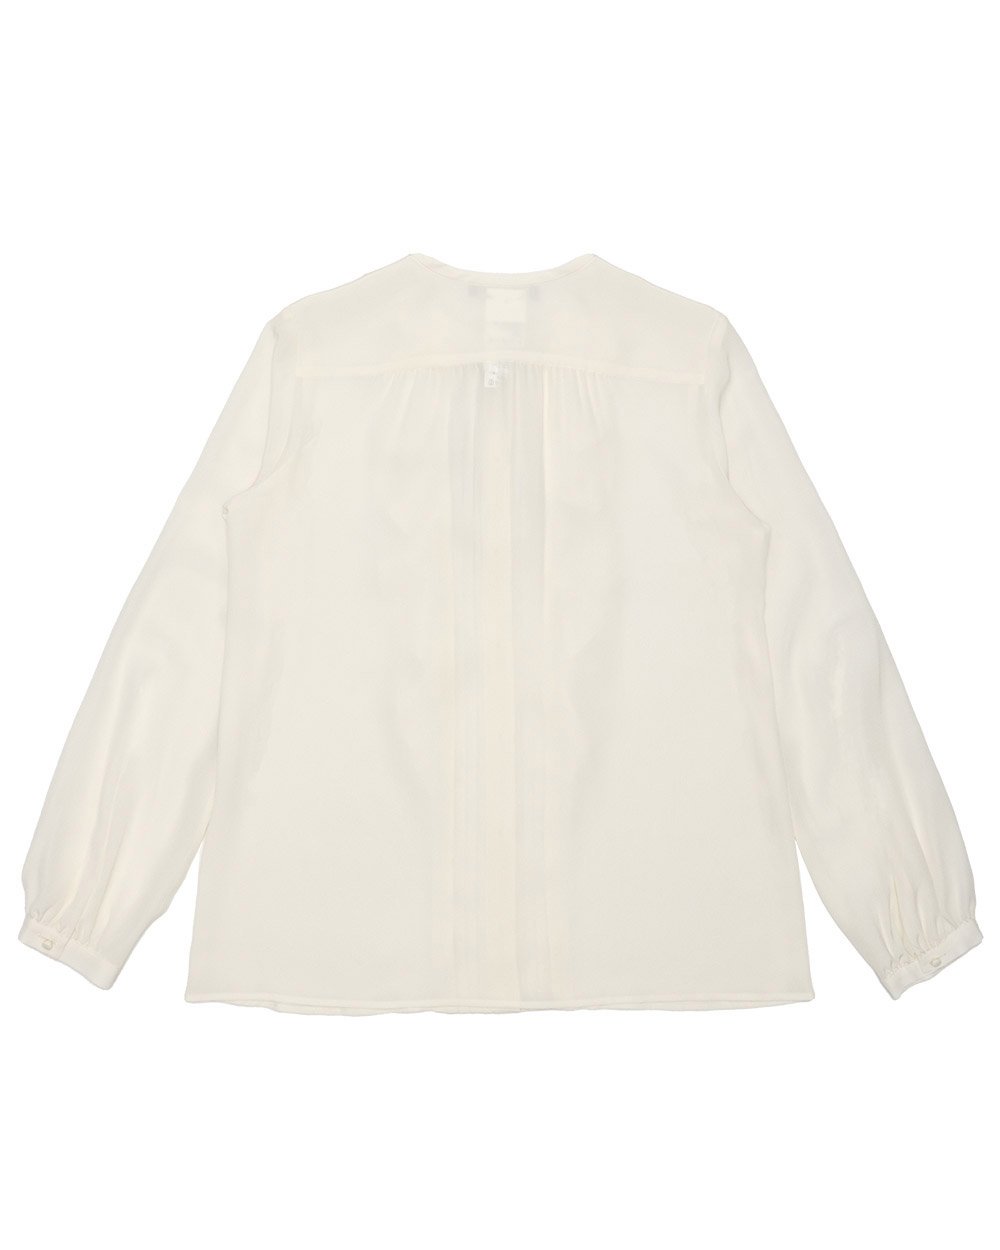 Afgano Silk Shirt - ISSI Outlet